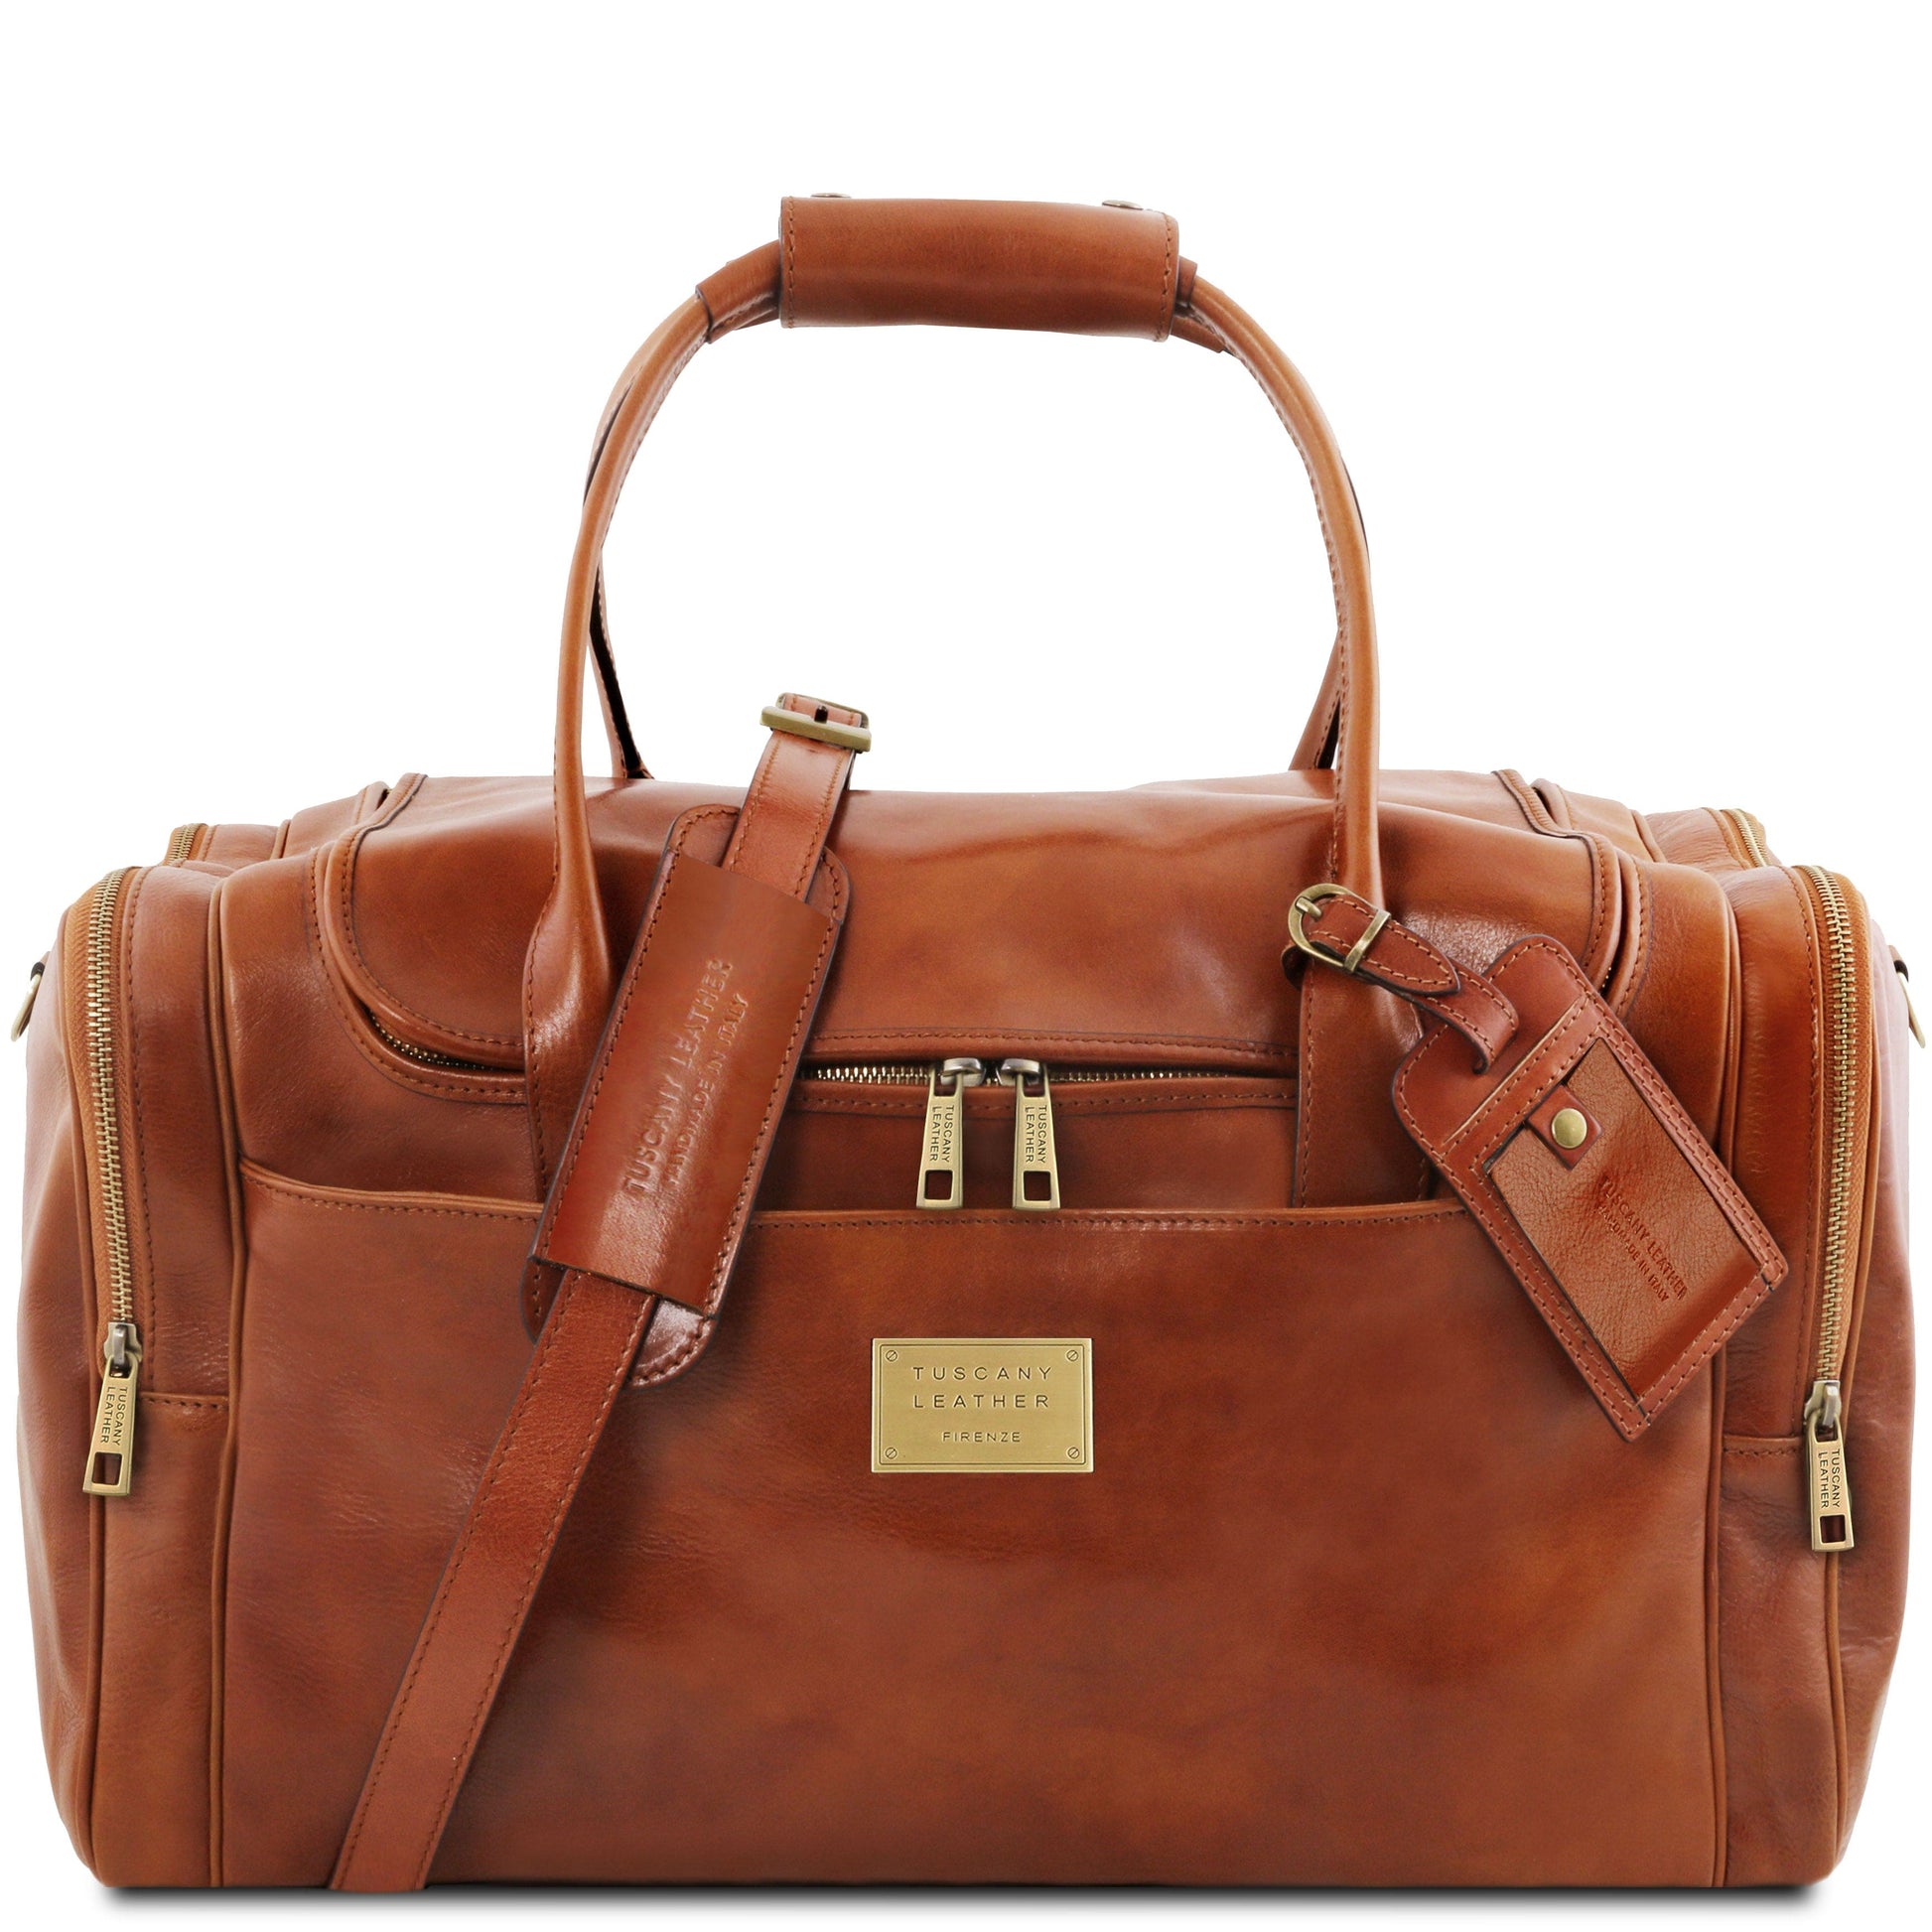 TL Voyager - Travel leather bag with side pockets | TL142141 - Premium Leather Travel bags - Shop now at San Rocco Italia